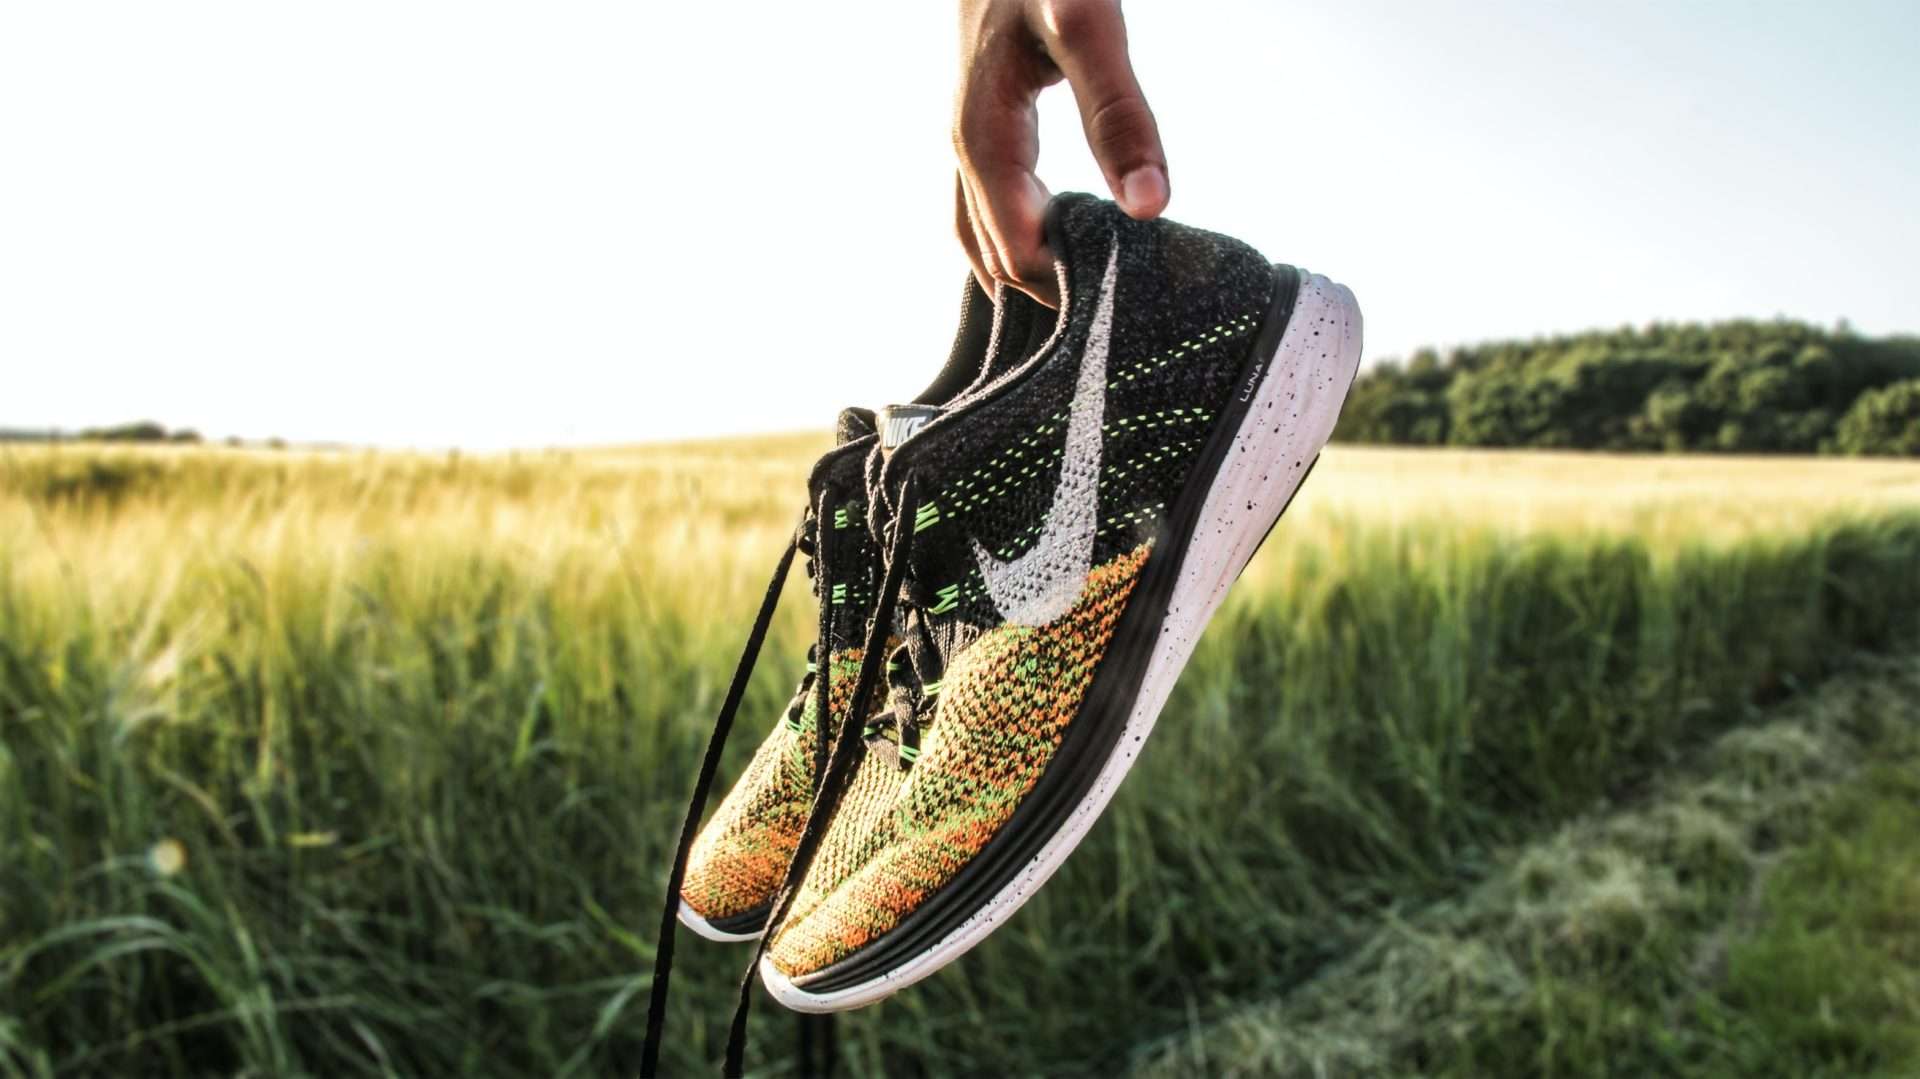 How often should you replace your running shoes?